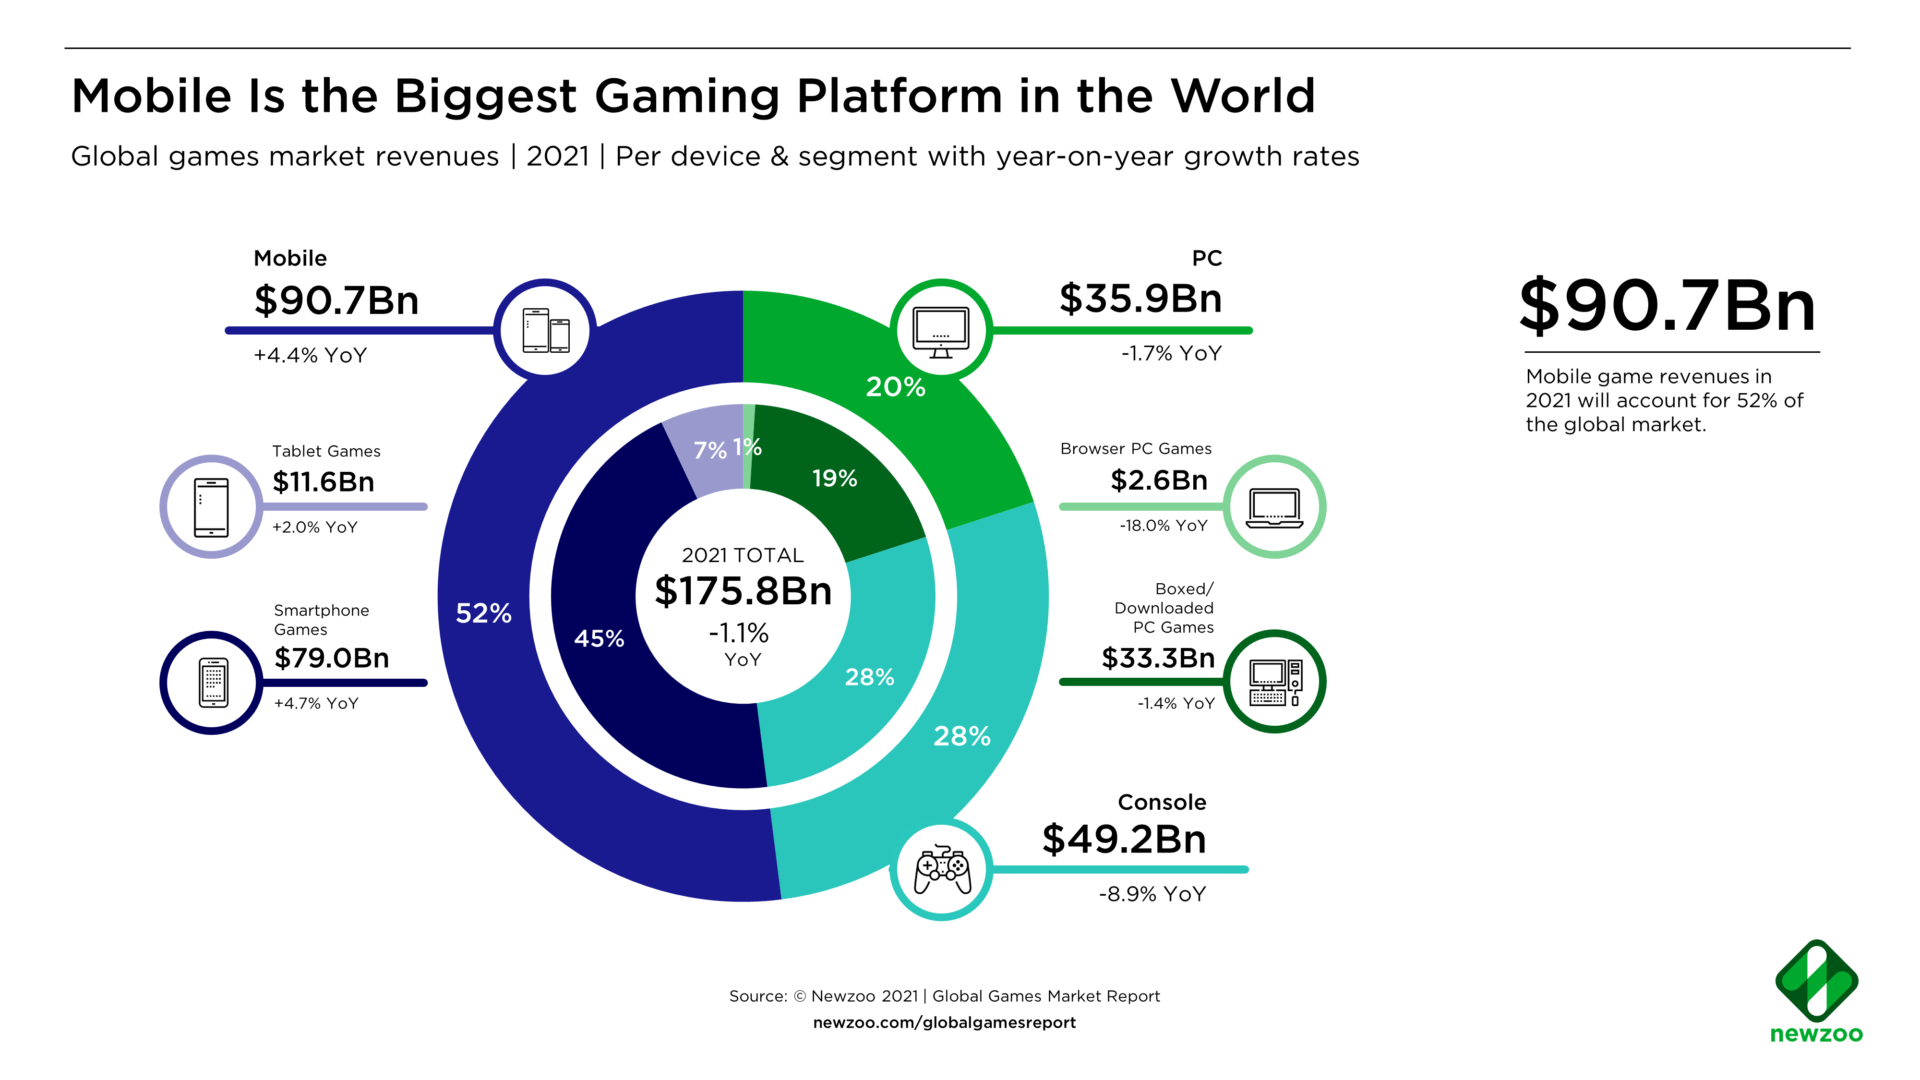 Mobile-Is-the-Biggest-Games-Platform-in-the-World-1920x1080-1.png